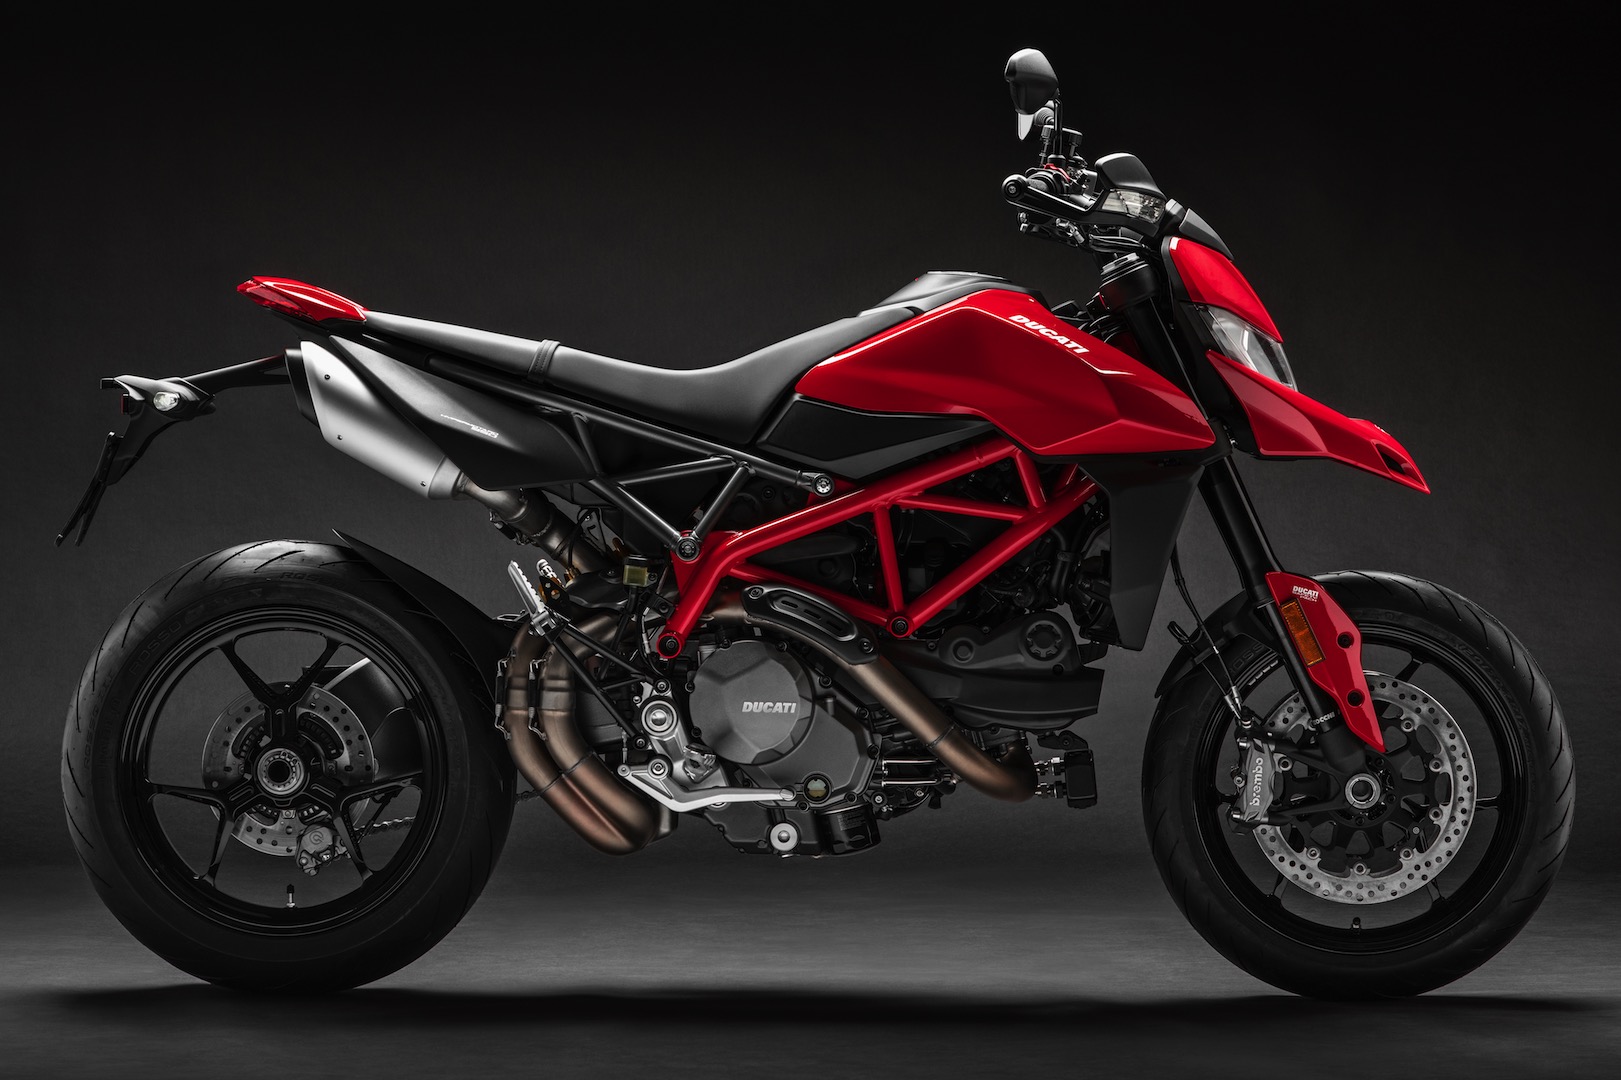 2019 Ducati Monster Hypermotard 950 First Look Supermoto Motorcycle 8 P H Motorcycles